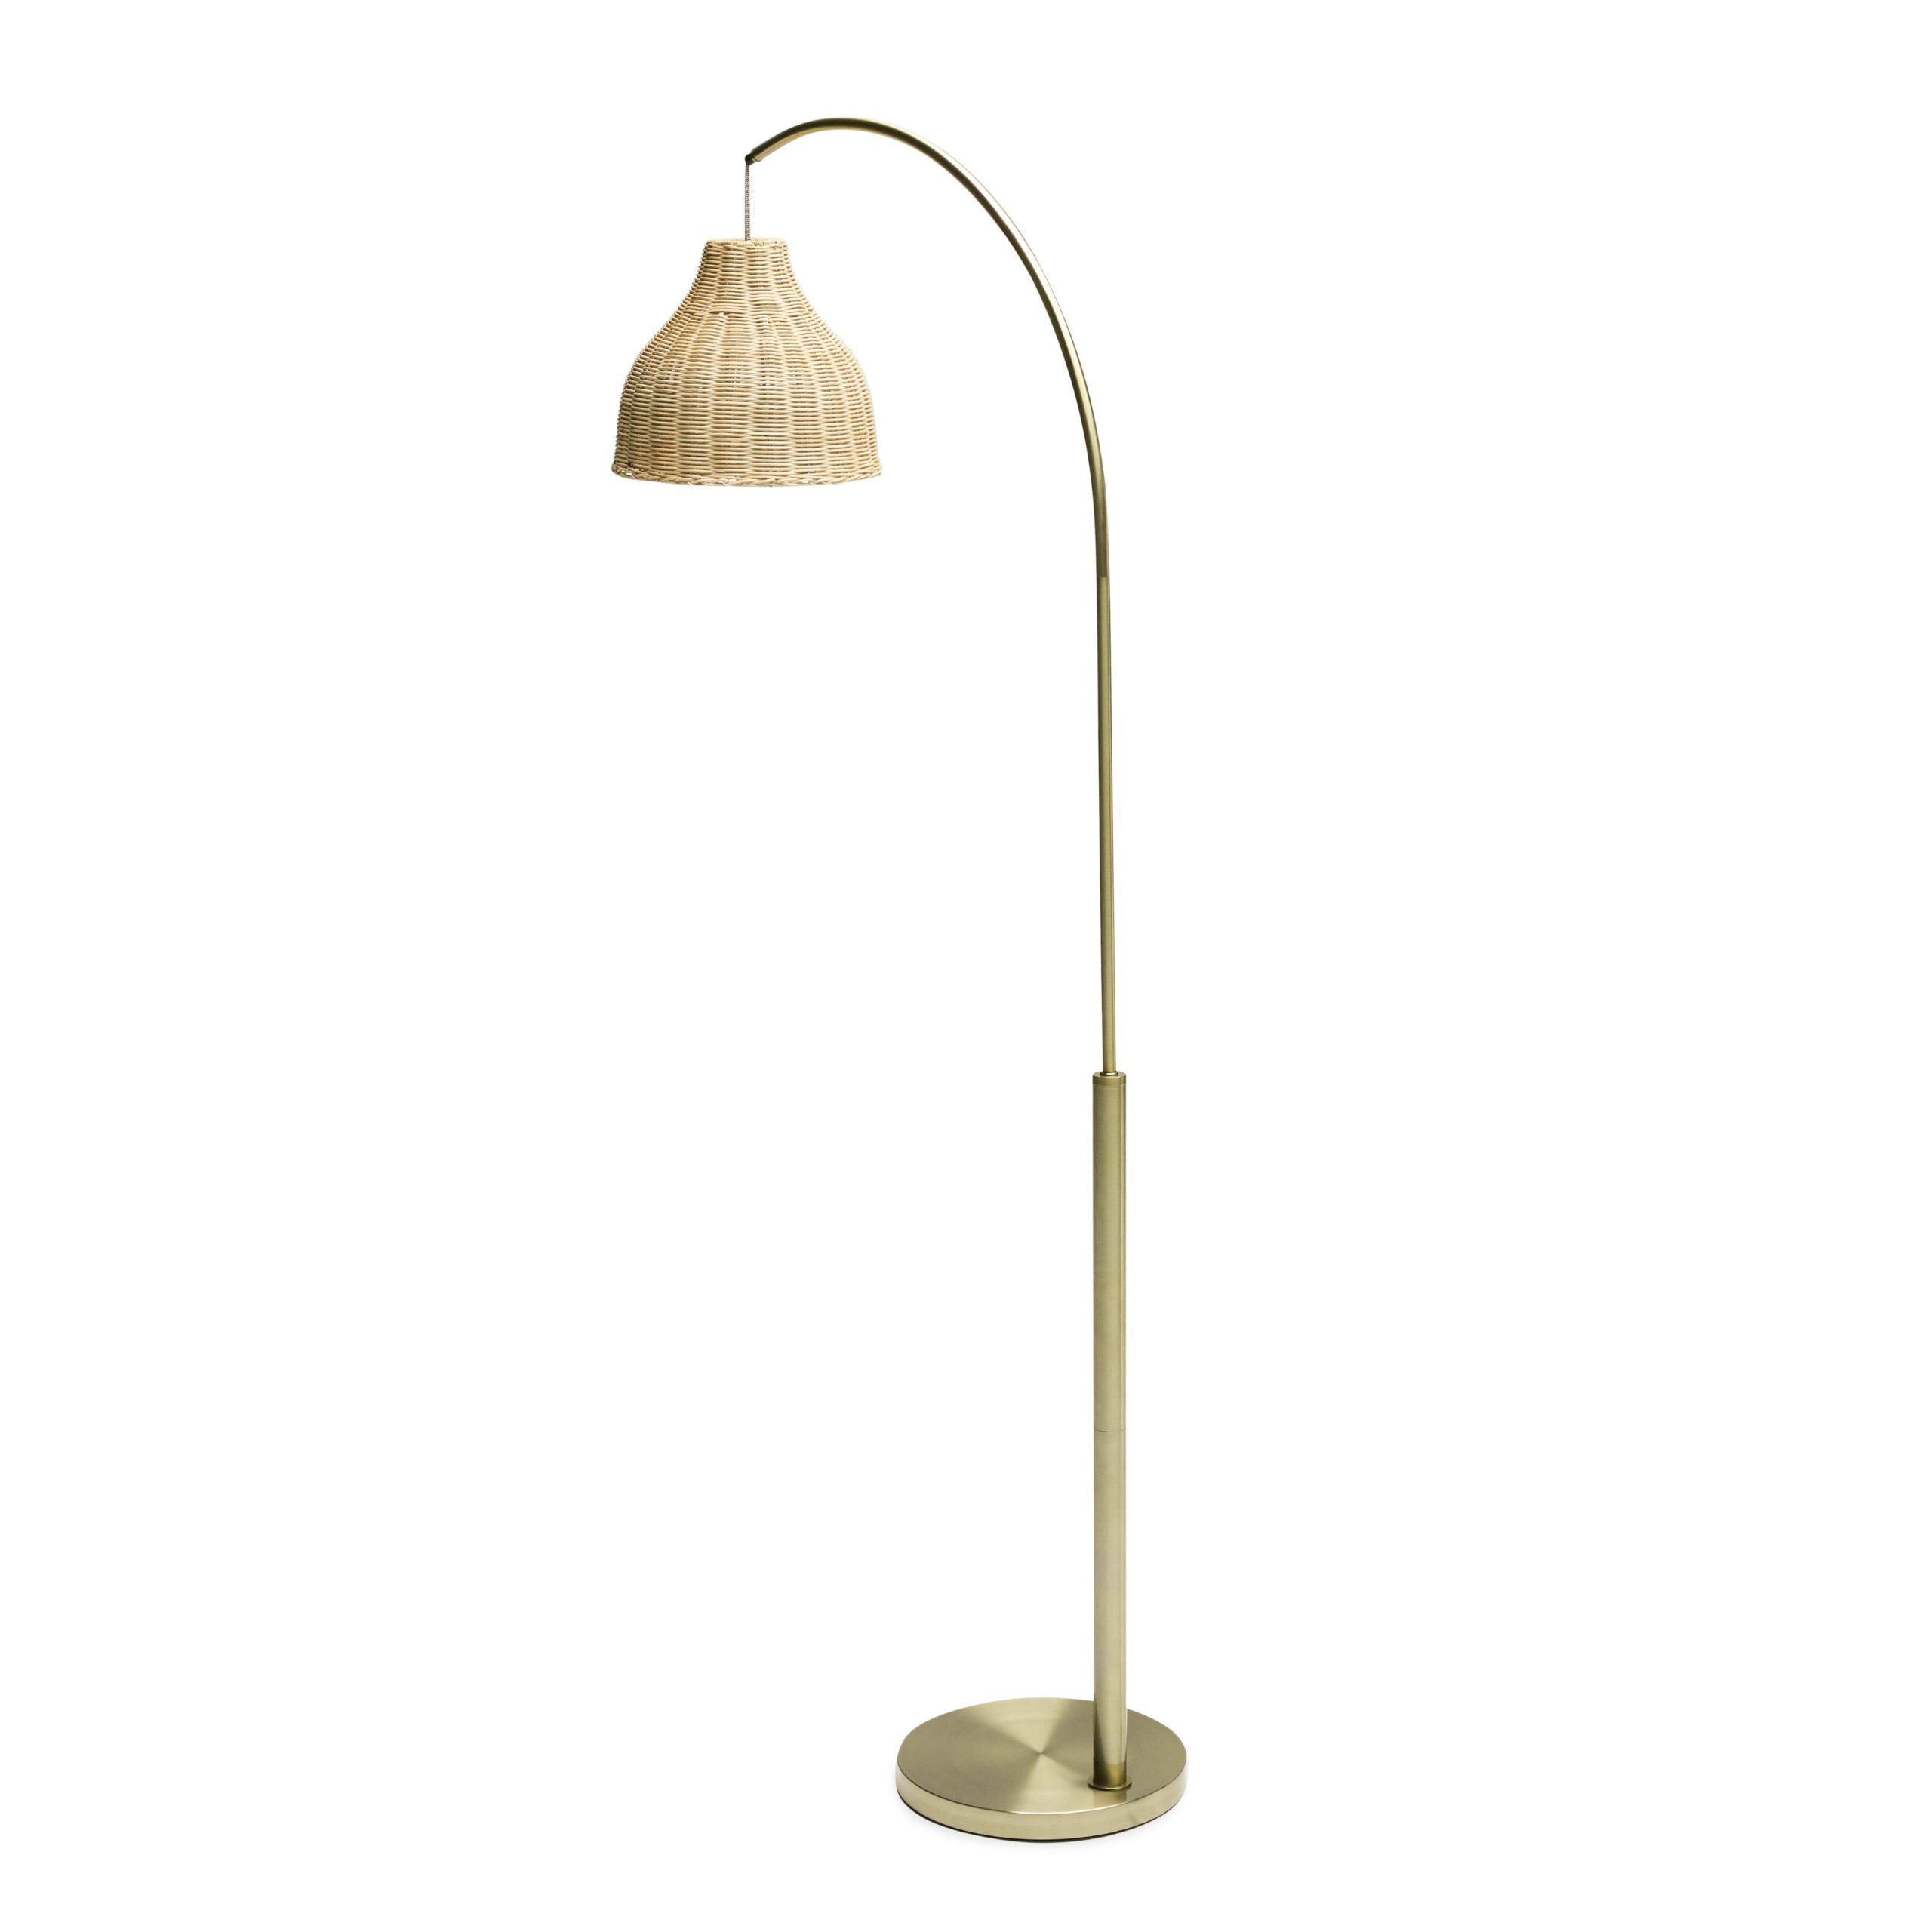 Arch Floor Lamp With Rattan Shadedrew Barrymore Flower Home, Antique  Brass – Walmart With Regard To Newest Rattan Floor Lamps (View 14 of 15)